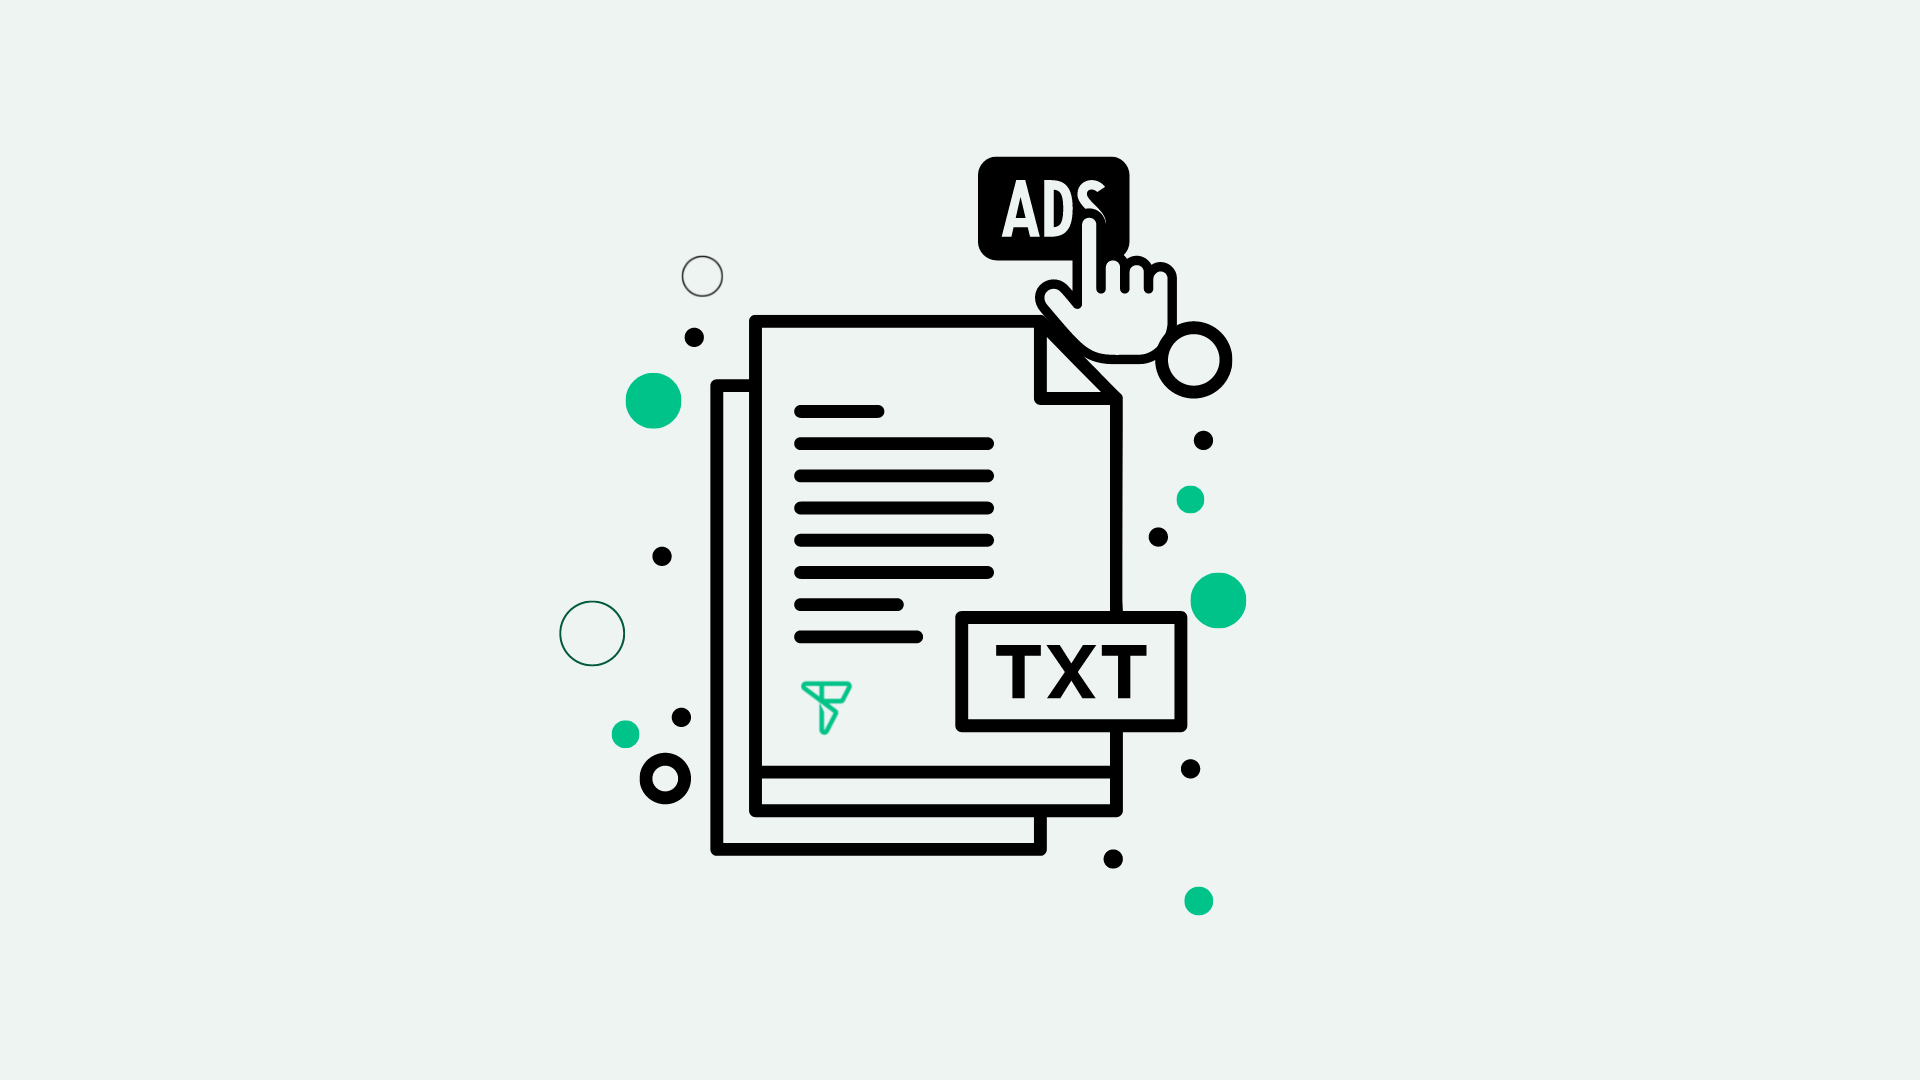 Everything You Should Be Asking About Ads.txt